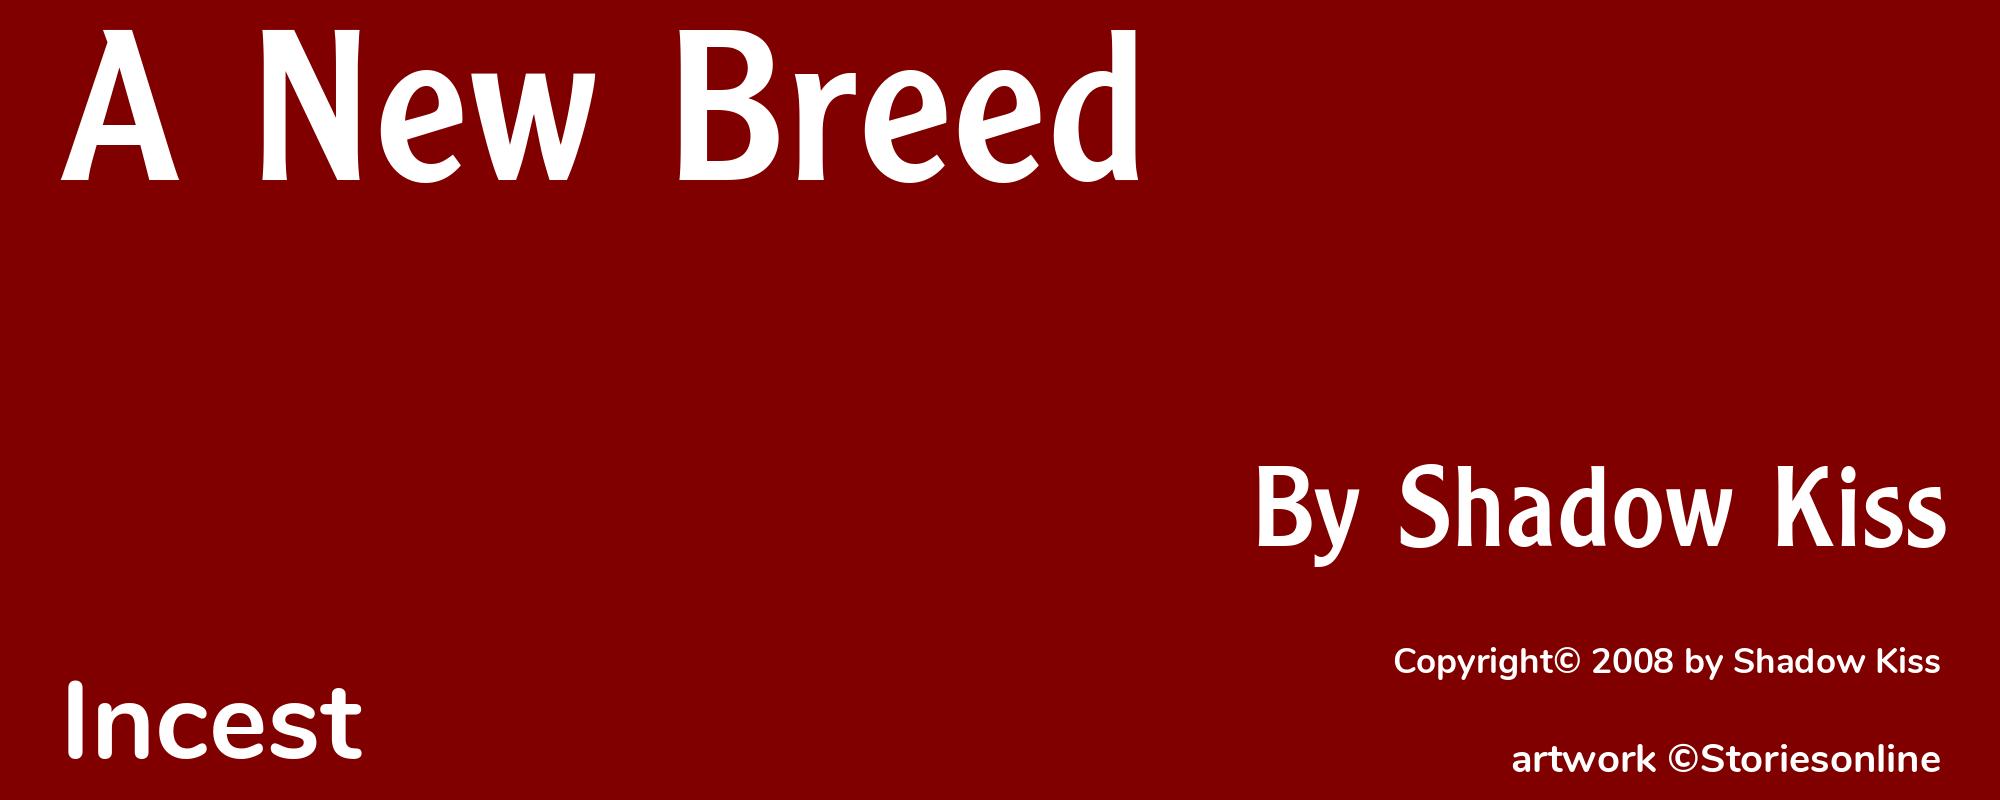 A New Breed - Cover